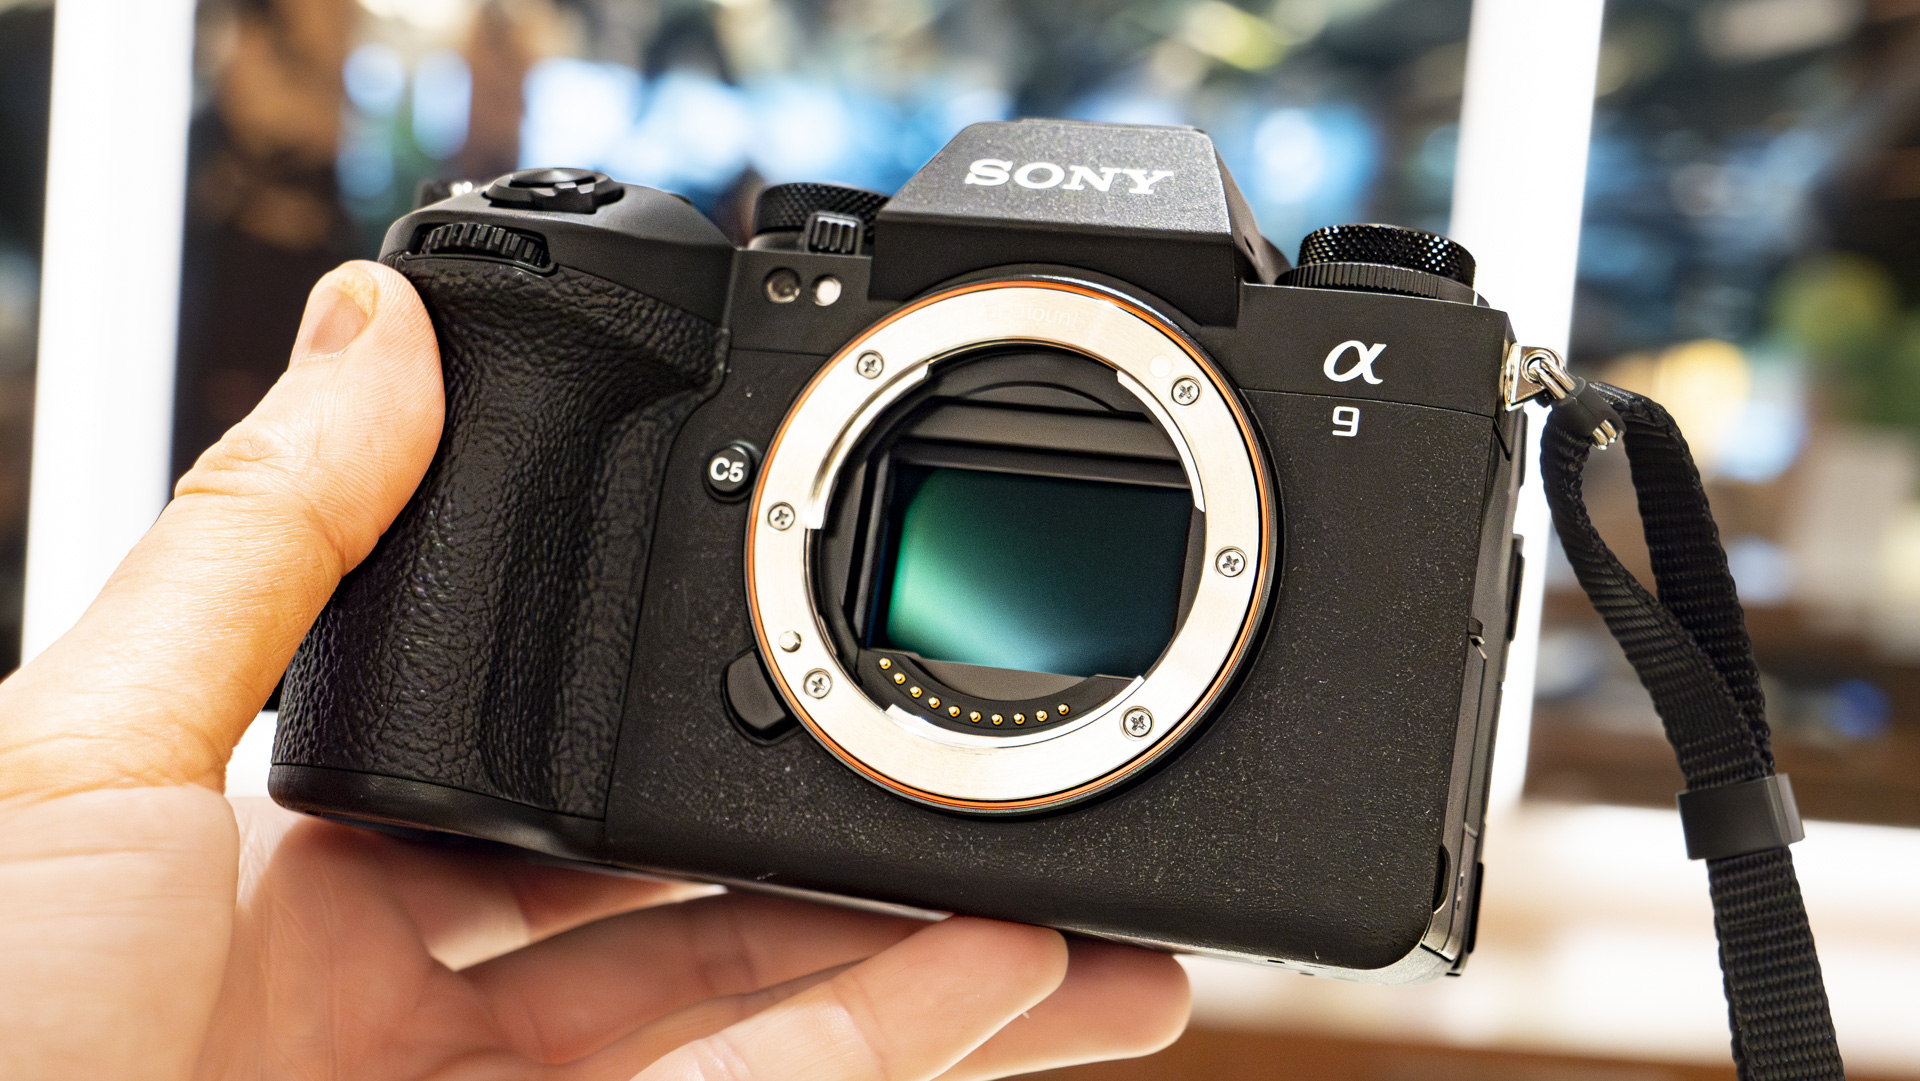 Survey shows Sony A7 III is favorite camera for pro photographers